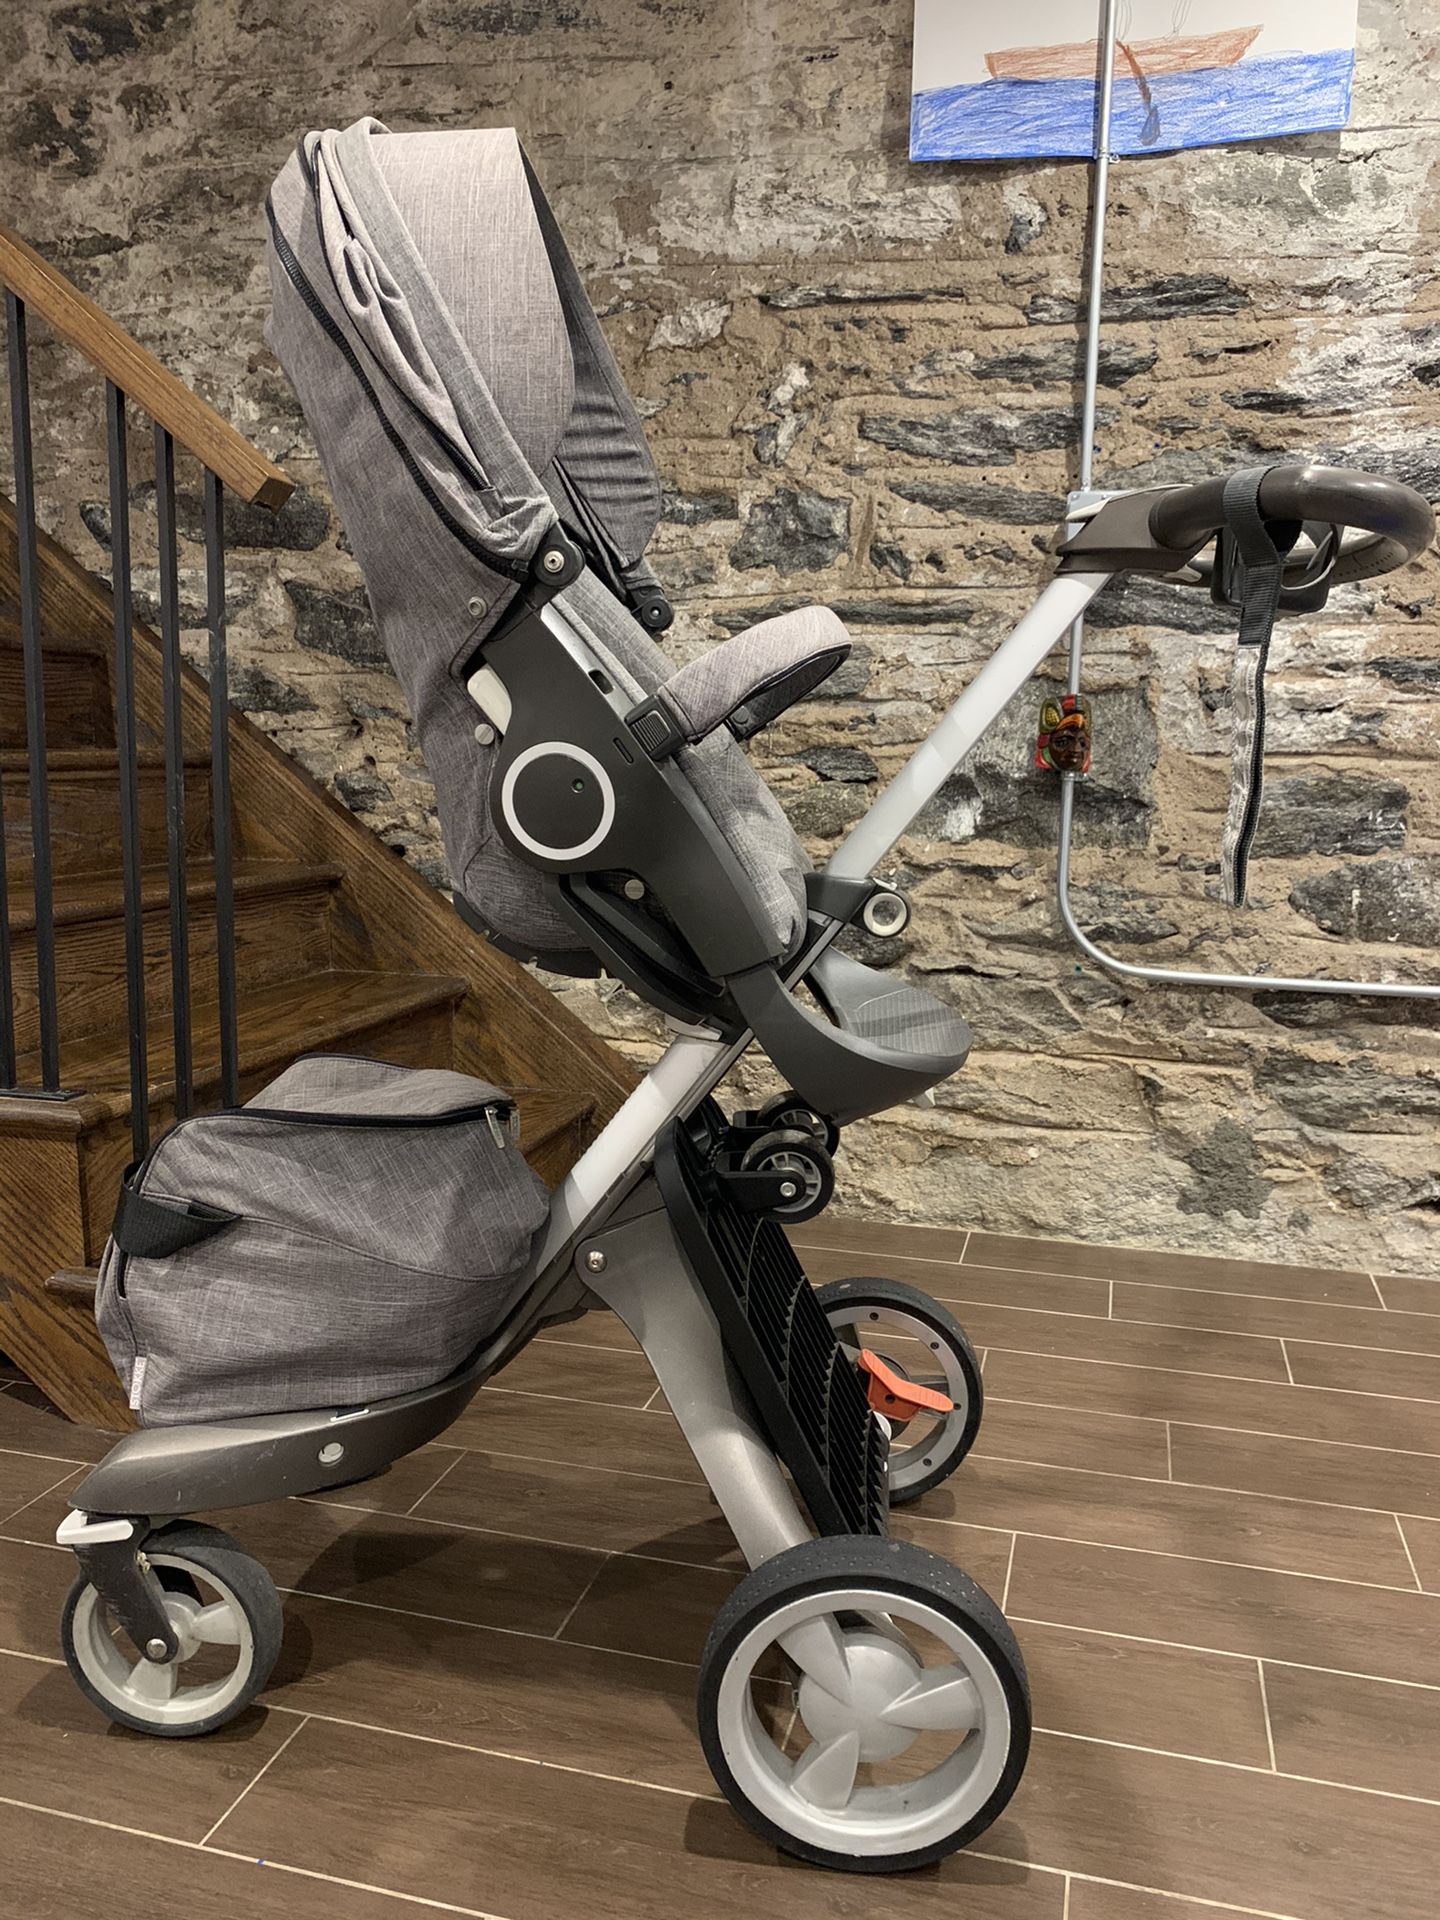 Stokke Xplory Grey Stroller with Sibling Board, Winter Kit, Manuals, Rain Cover